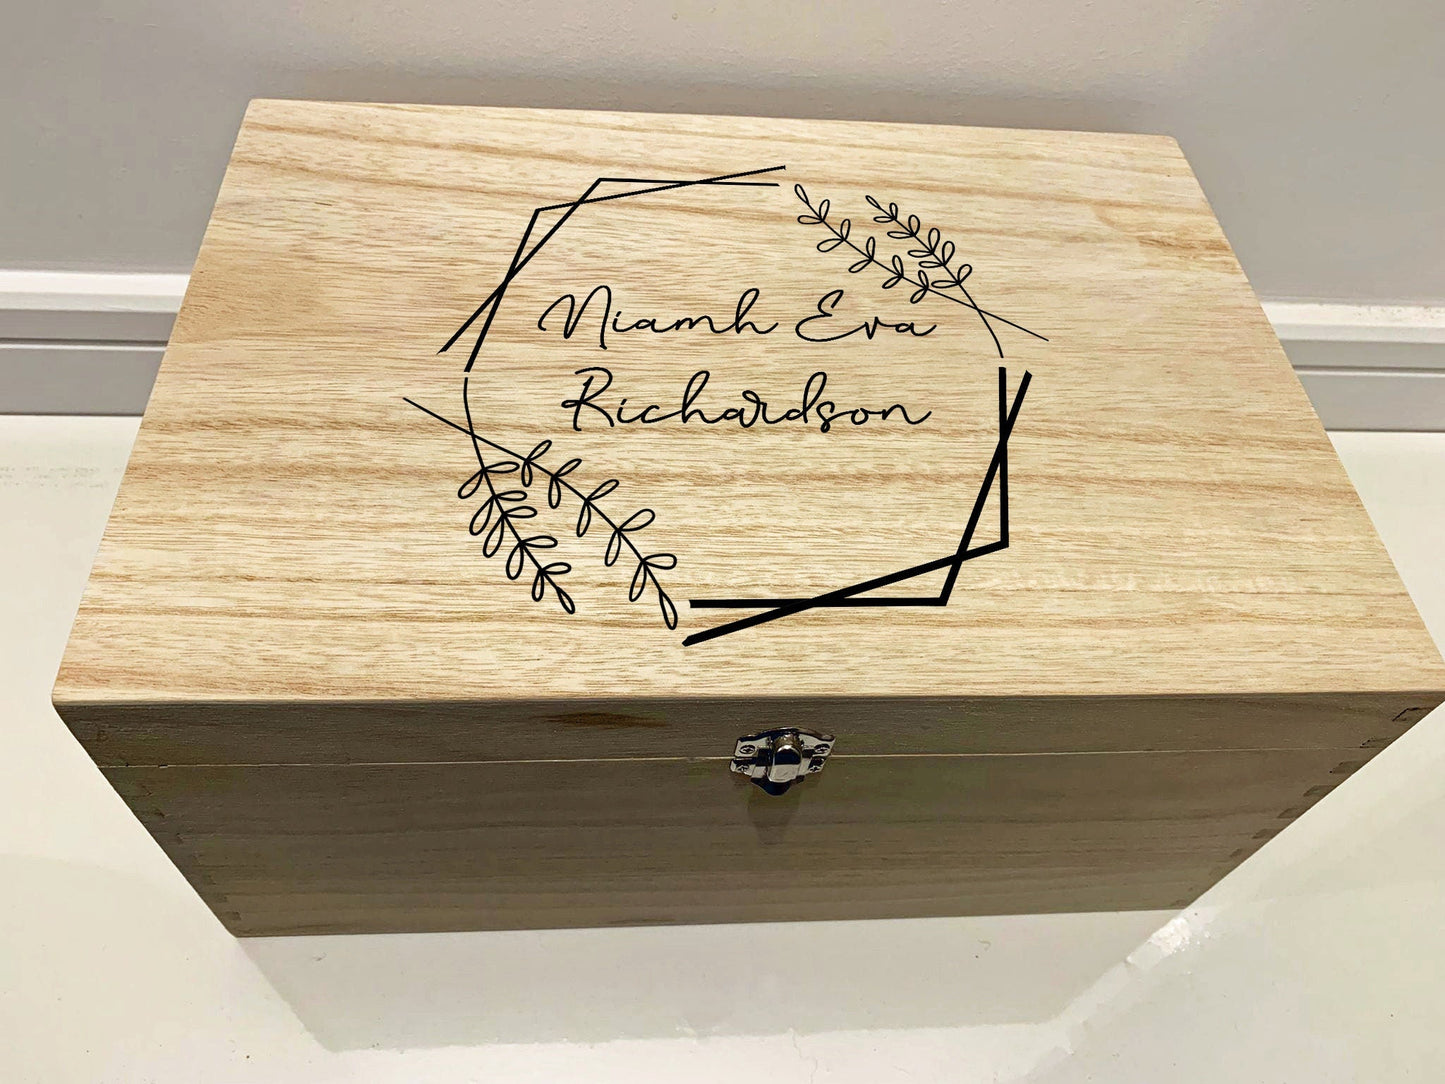 Large Personalised Engraved Wooden Baby Keepsake Box with Hexagon and Flowers - Resplendent Aurora